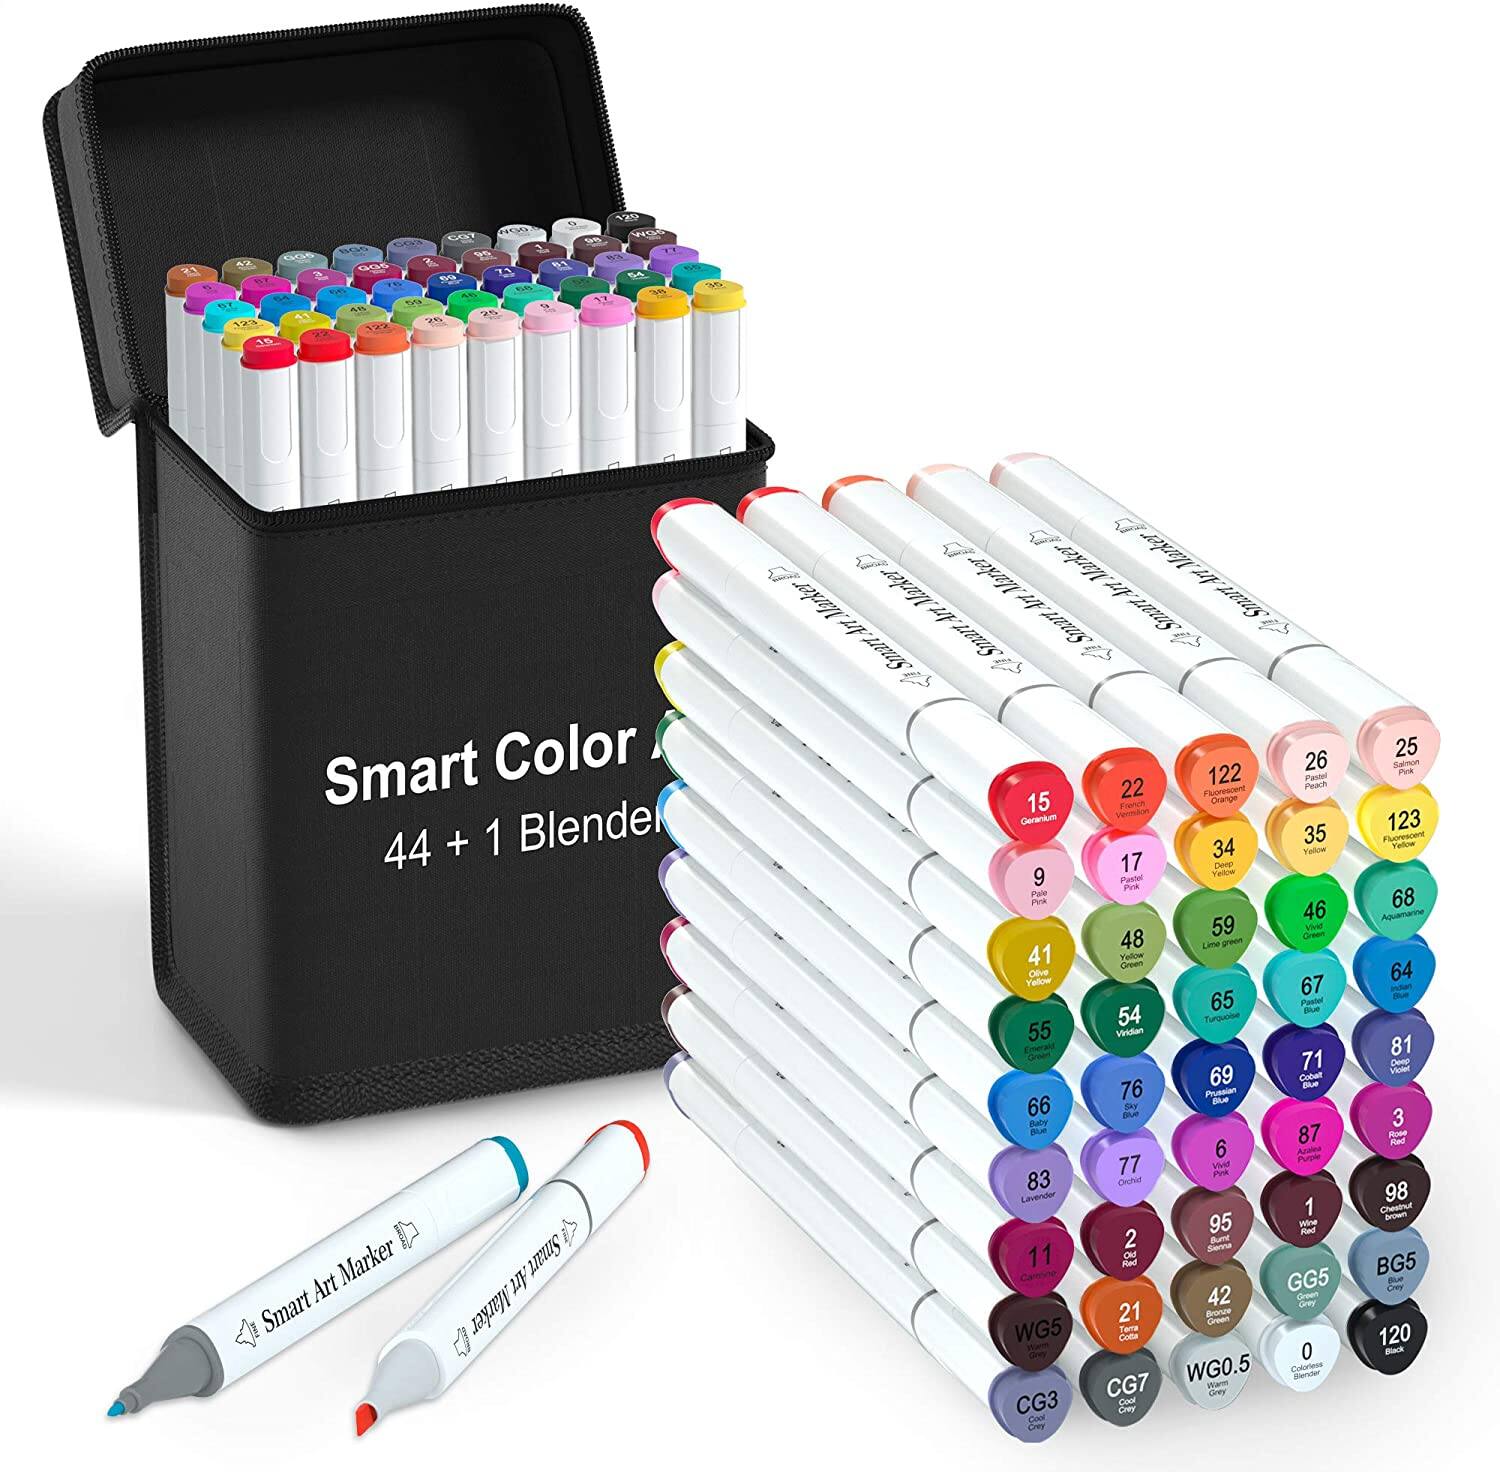 Smart Color Art 45 Colors Dual Tip Art Markers $11.99 + Free shipping w/ Prime or $25+